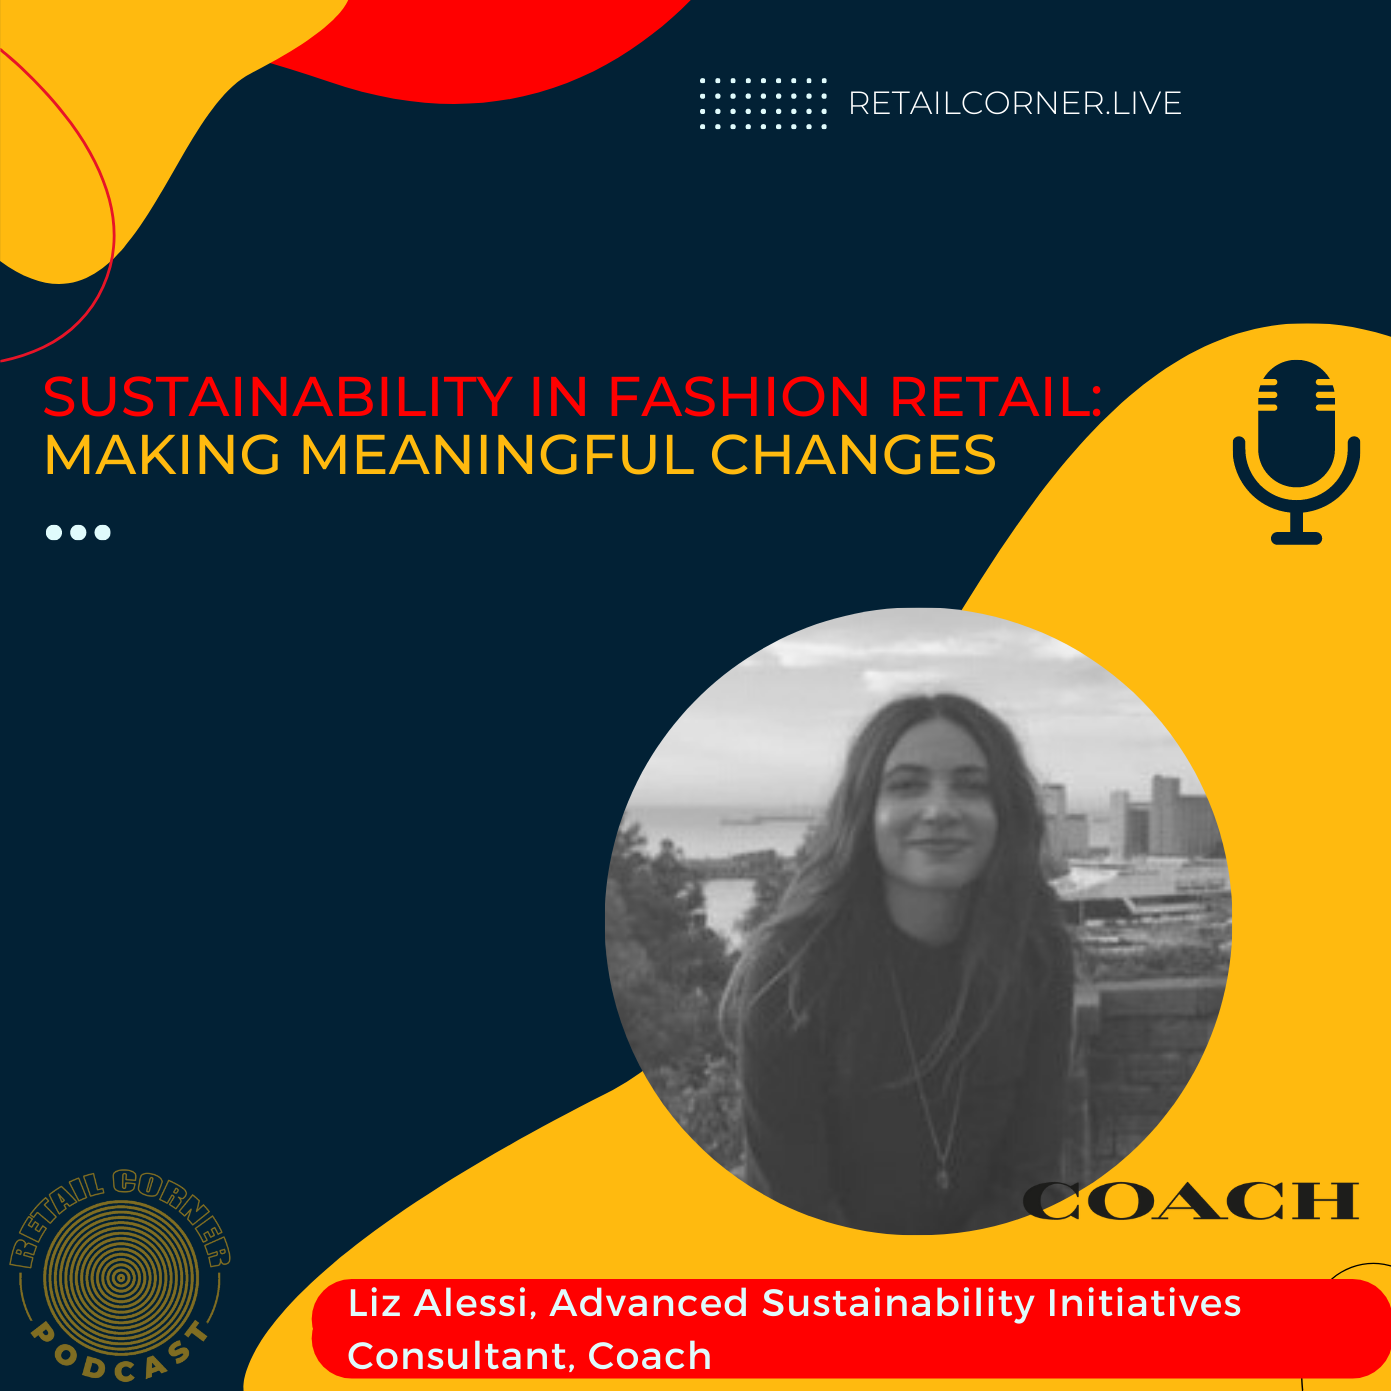 Sustainability in Fashion Retail: Making Meaningful Changes Image